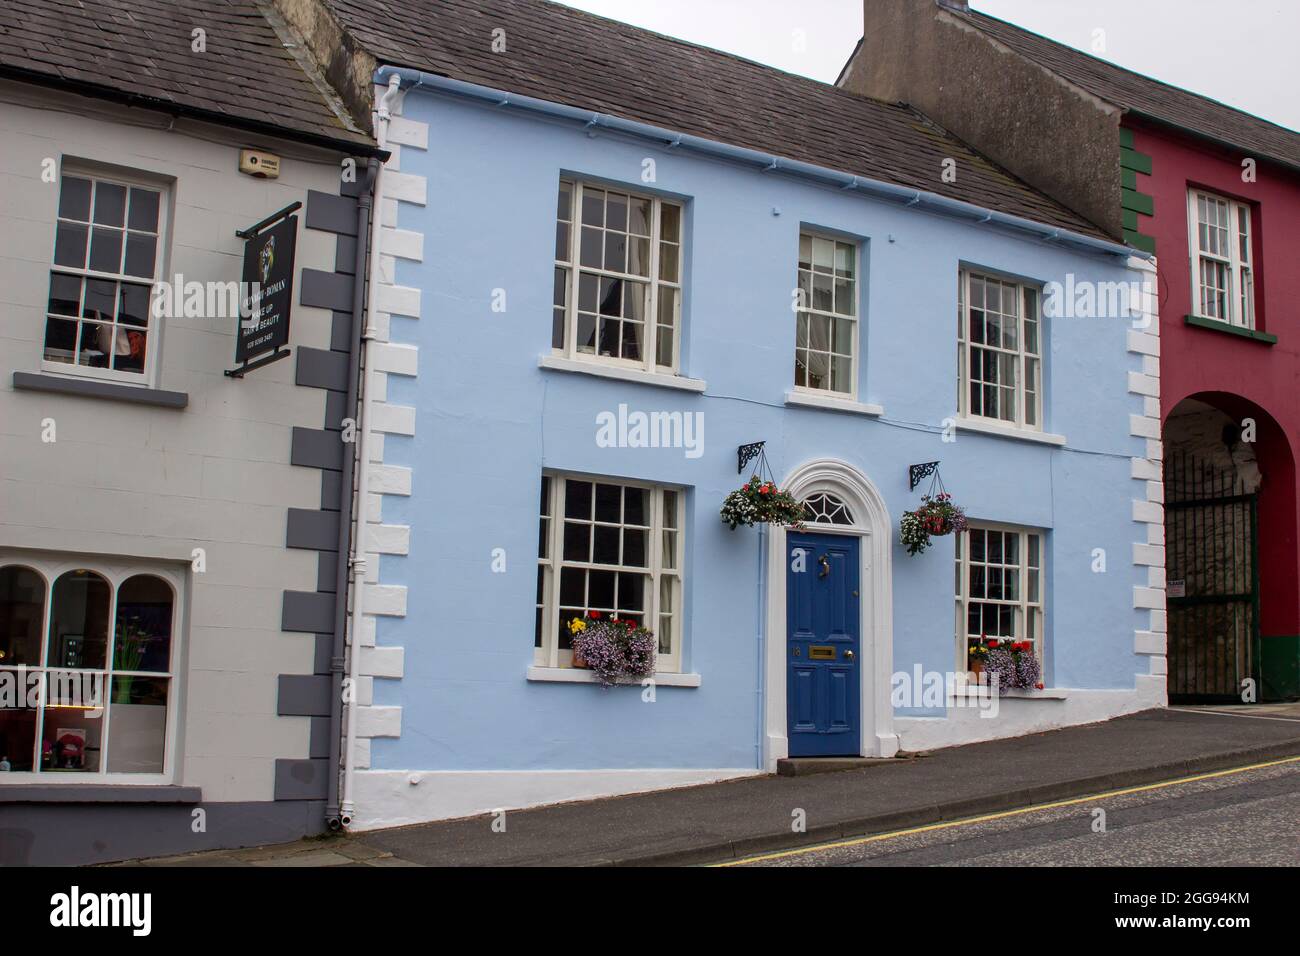 26 August 2021 A row of beautiful Georgian terraced properties located on Main Street in the Royal Trust village of Hilsborough County Down Northern I Stock Photo